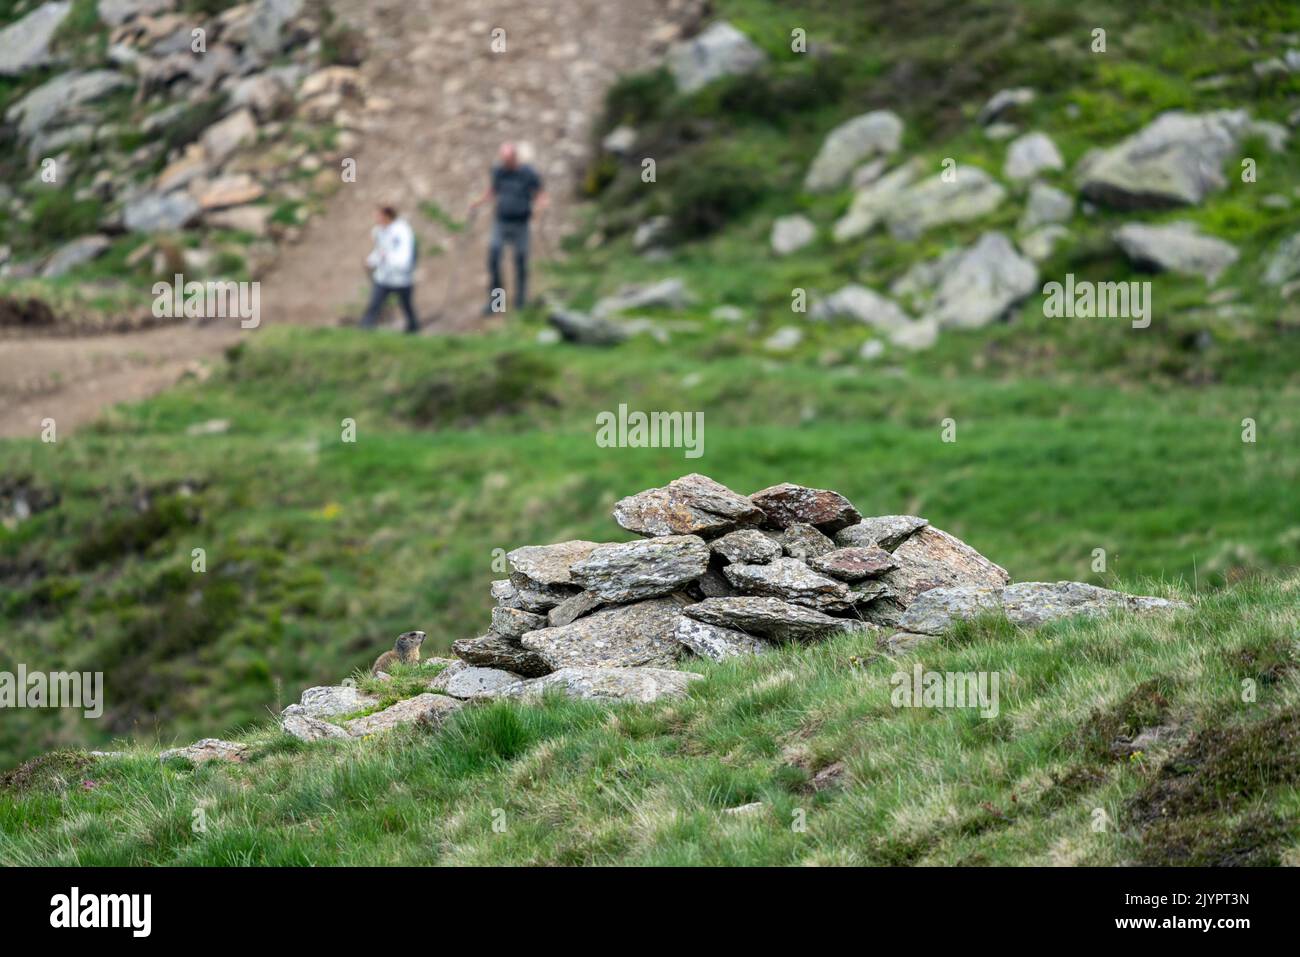 Alpine marmot (Marmota marmota) standing up behind a rock, while some hikers pass on the path further down. Valcolla, former municipality in the district of Lugano in the canton of Ticino, Switzerland Stock Photo